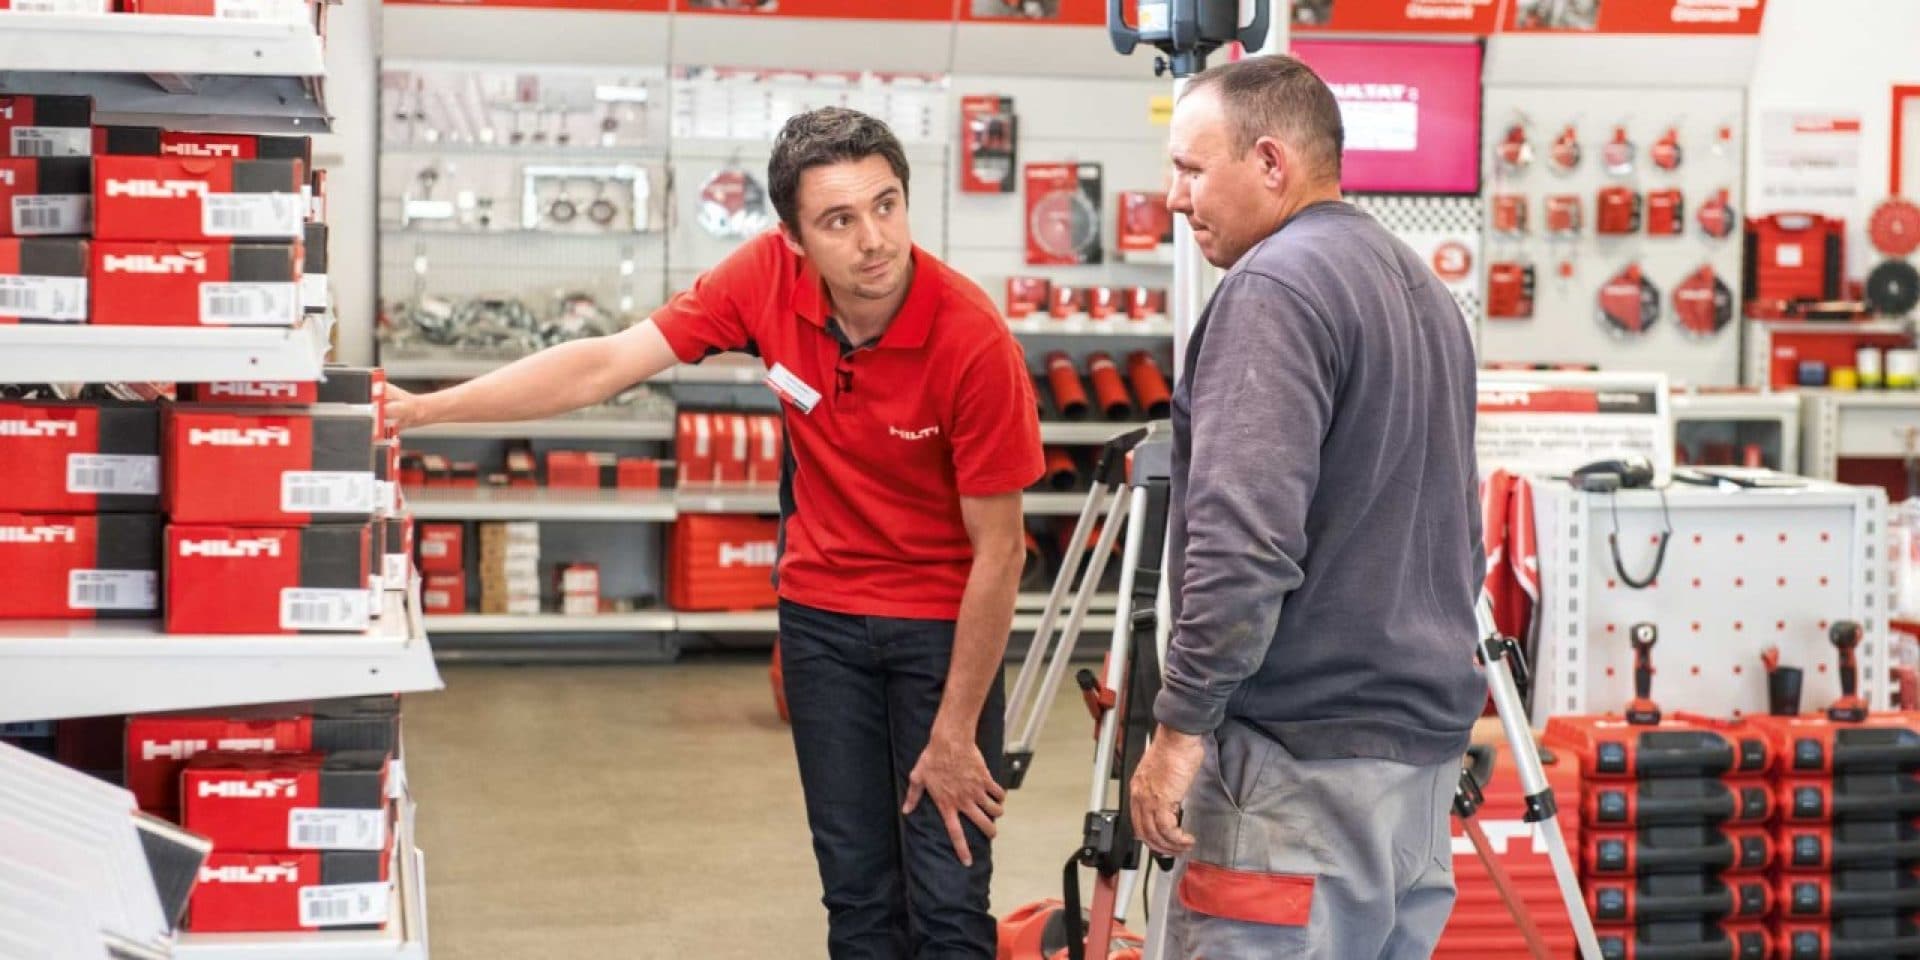 Hilti representative helping a customer find what they need at a Hilti store